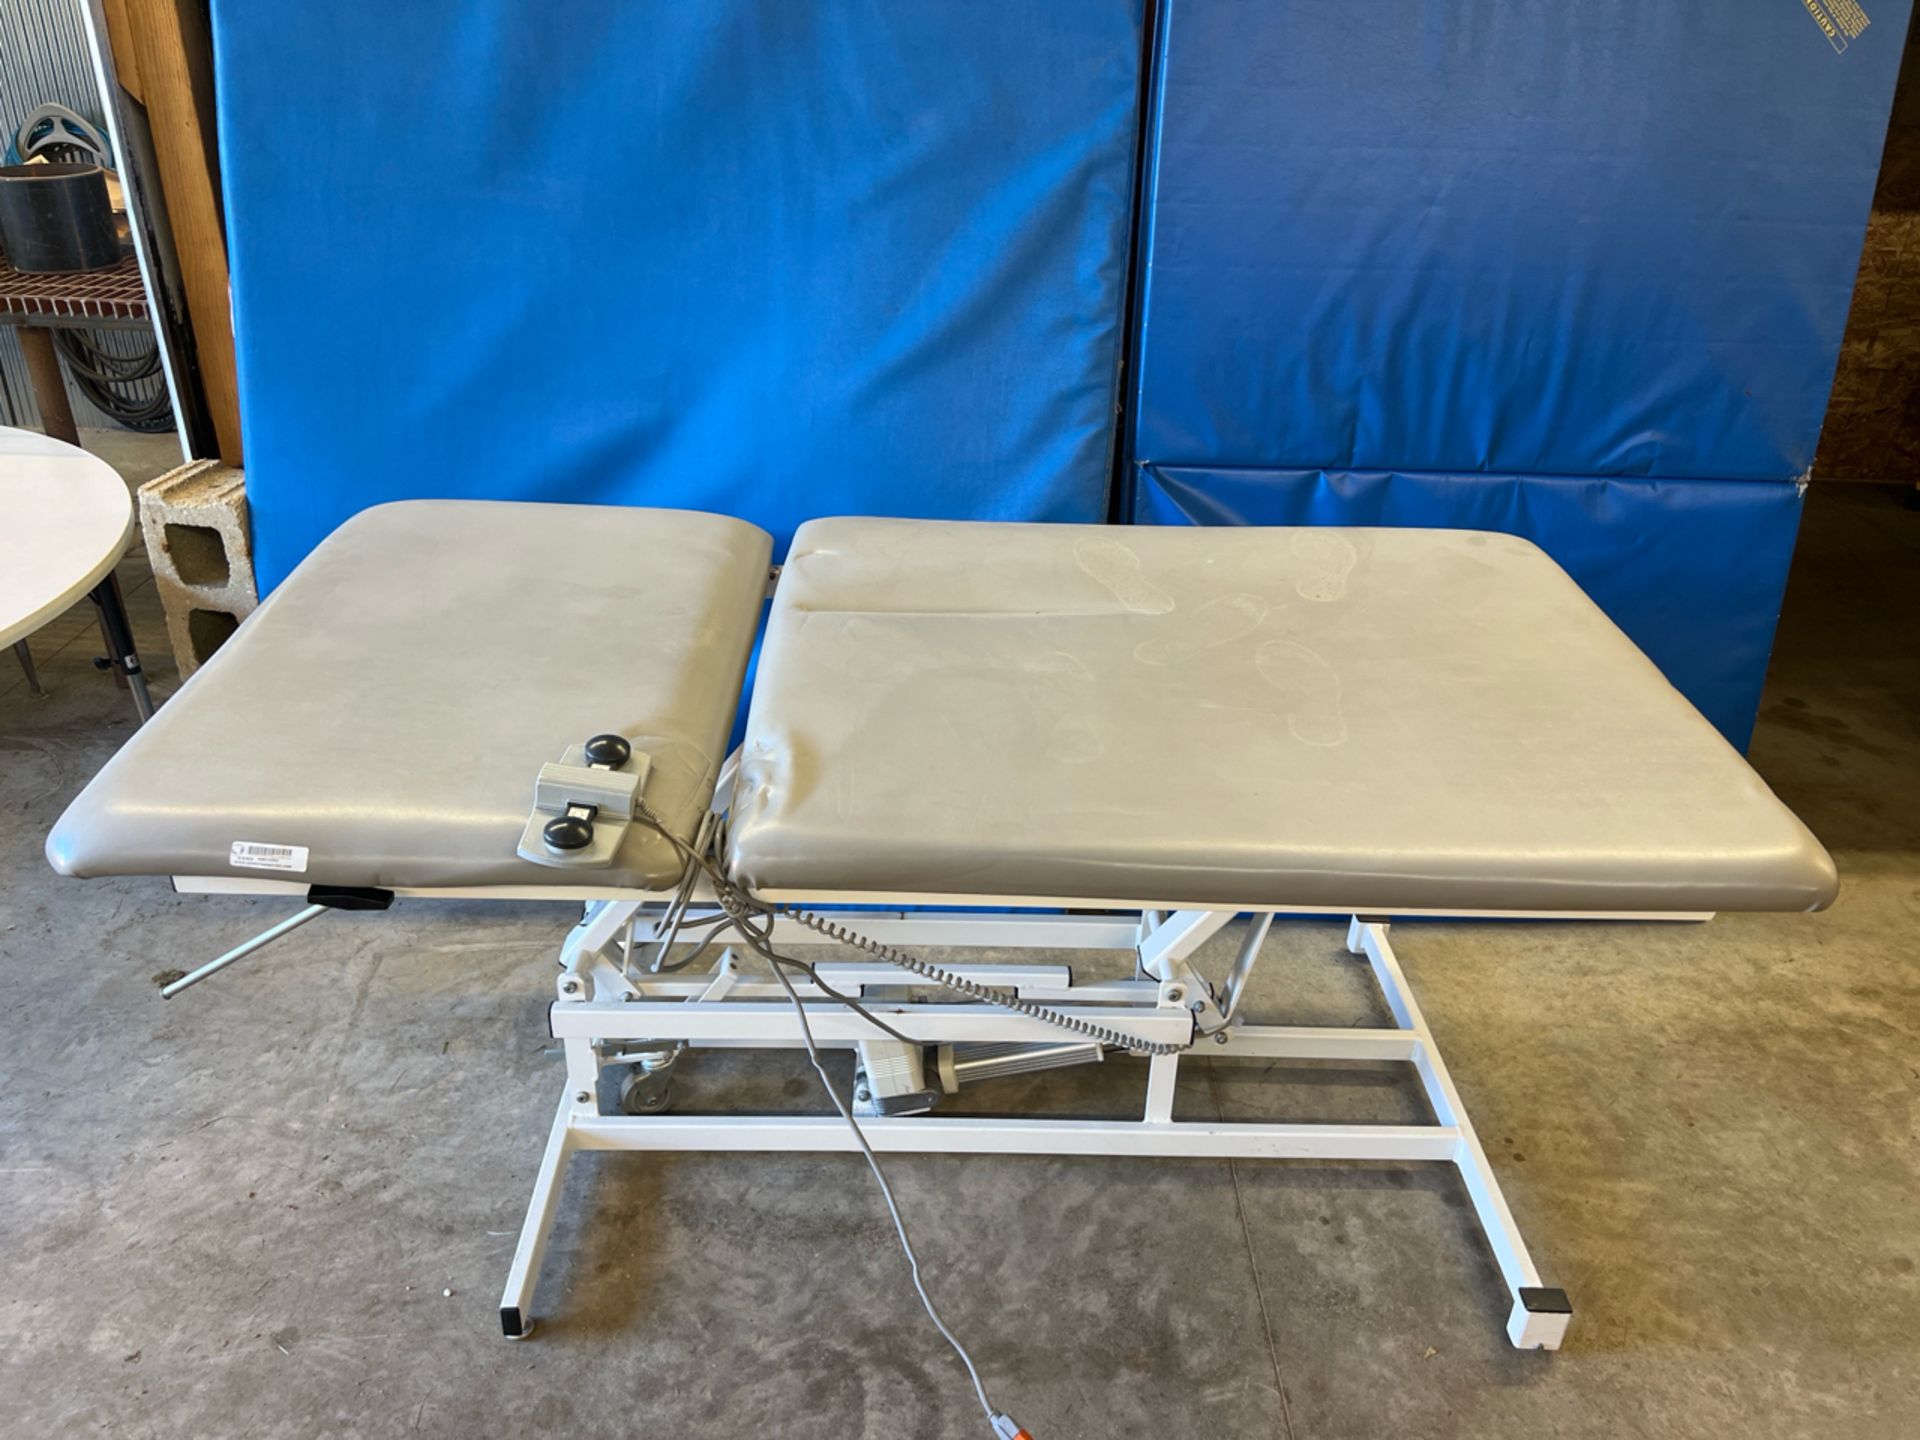 PERFORMA 553733 POWER THERAPY TABLE WITH FOOT CONTROL - Image 2 of 3